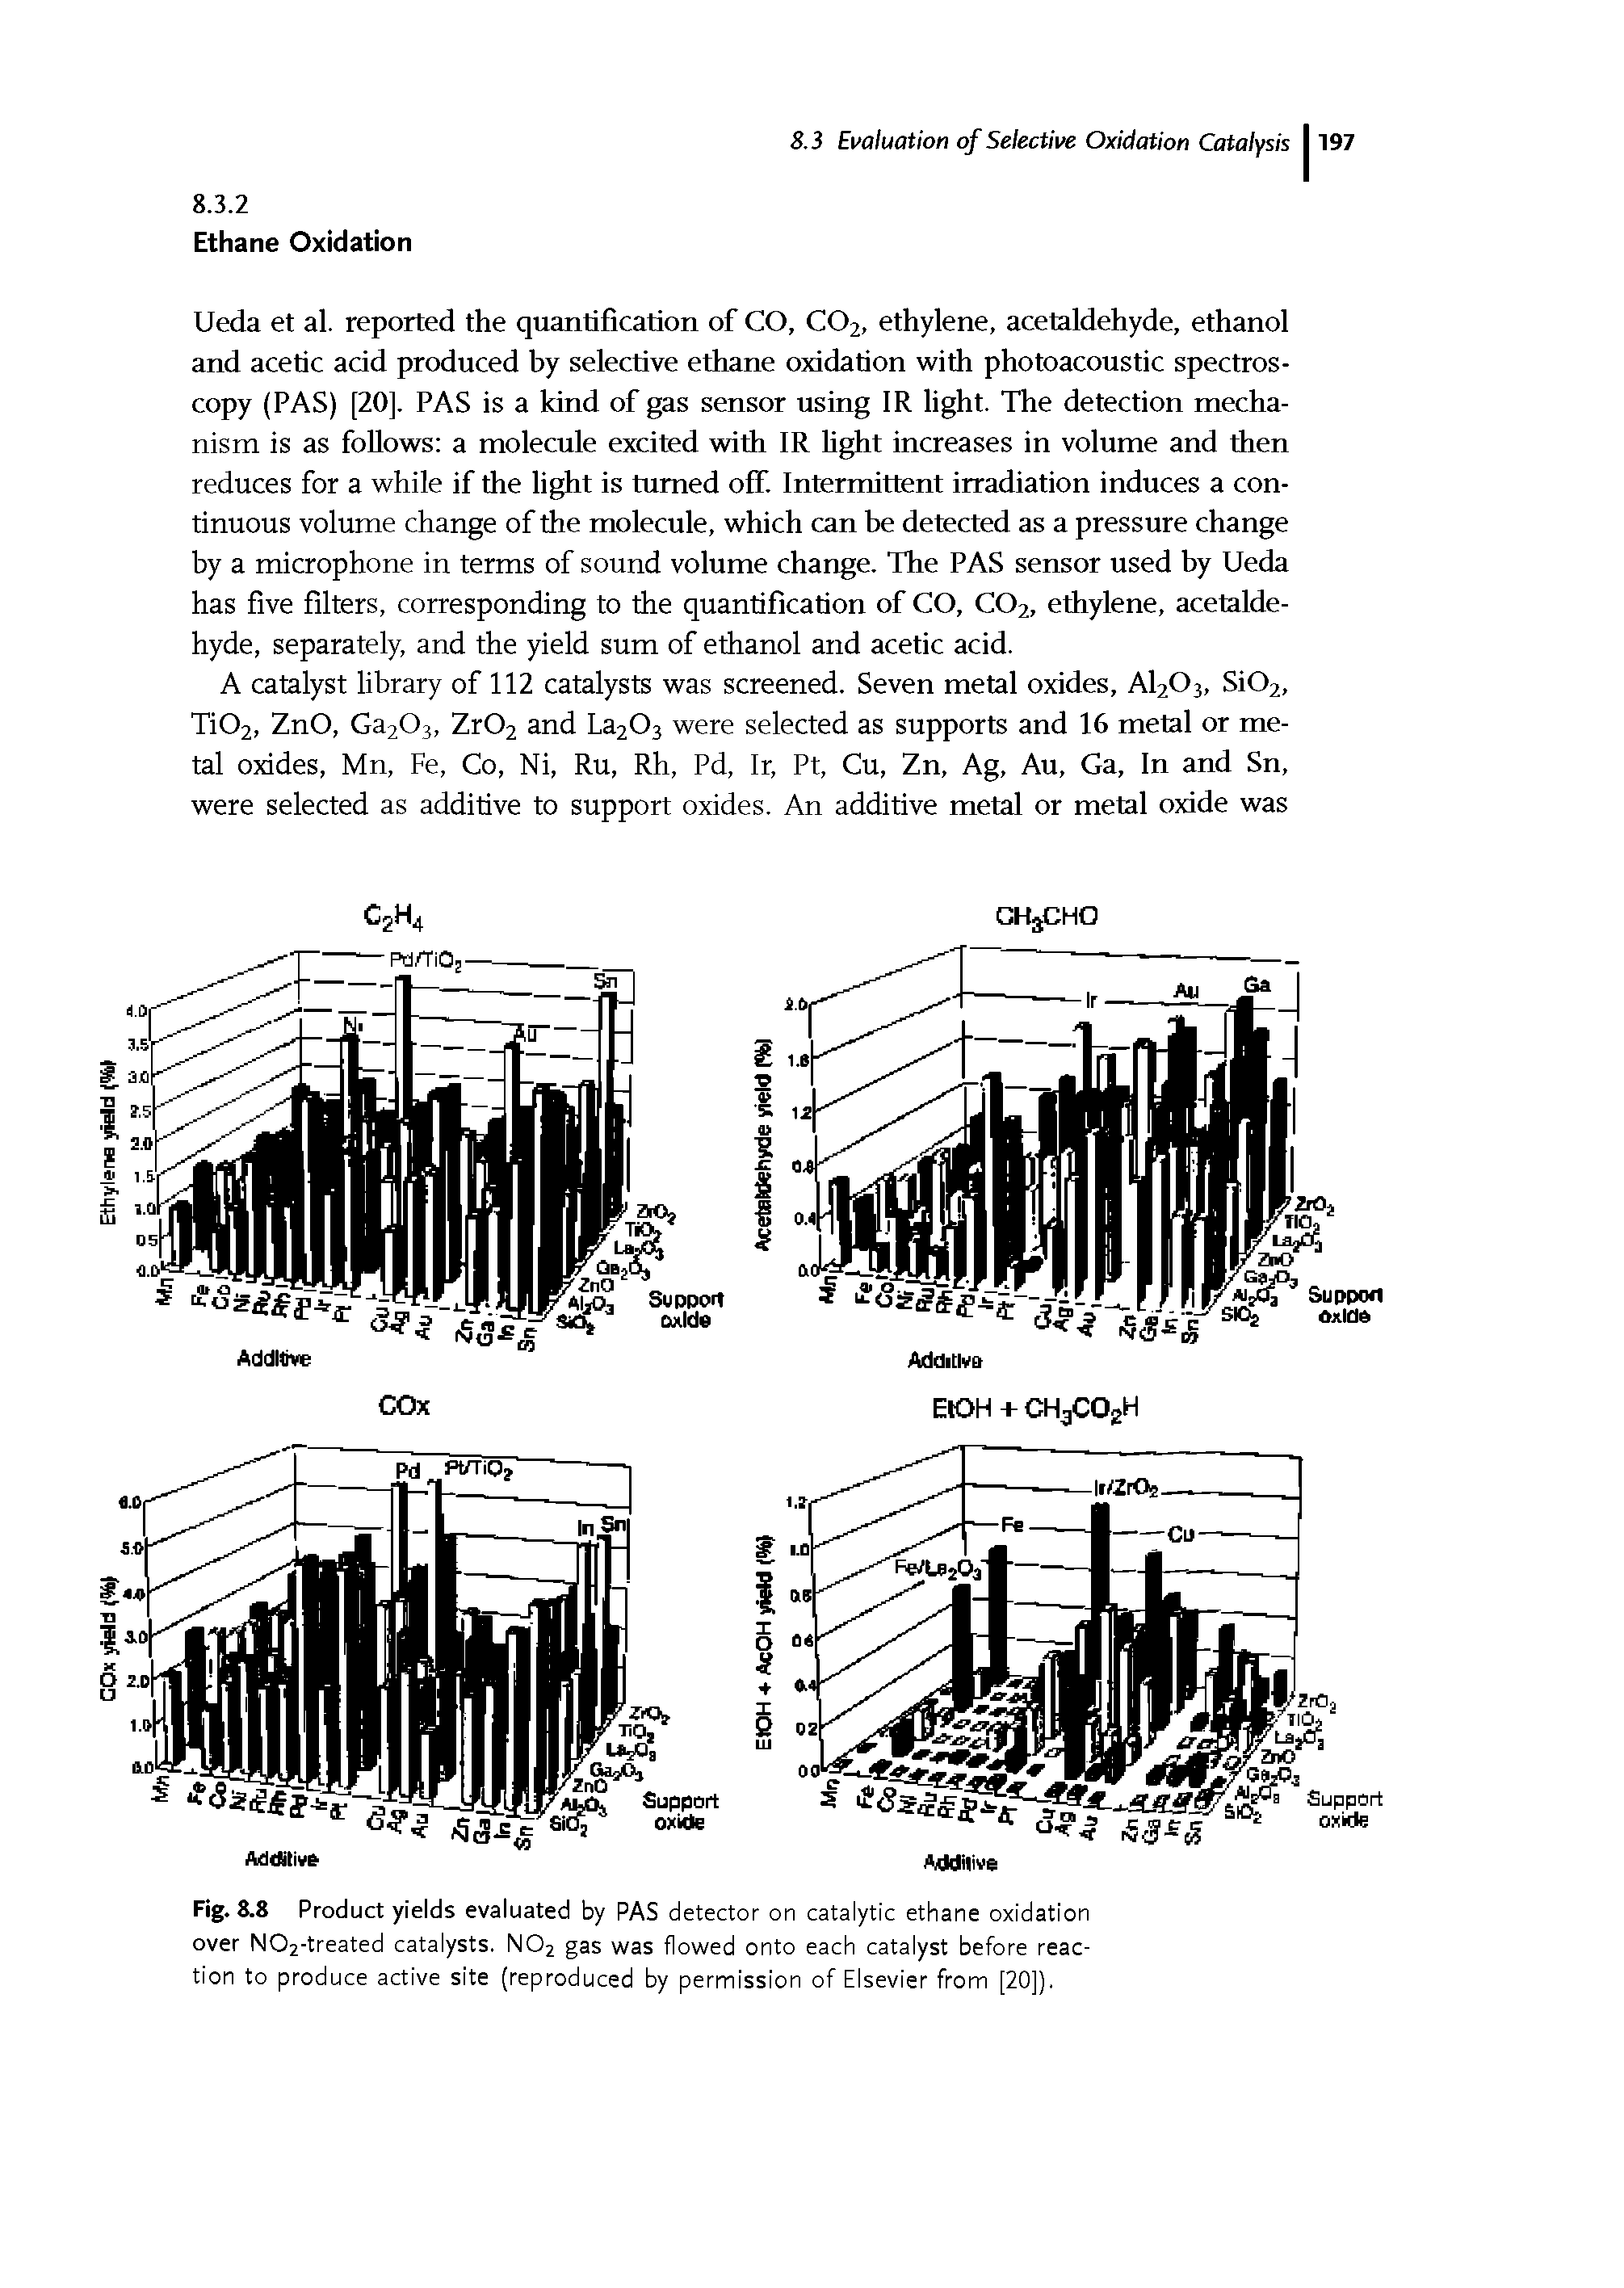 Fig. 8.8 Product yields evaluated by PAS detector on catalytic ethane oxidation over N02-treated catalysts. N02 gas was flowed onto each catalyst before reaction to produce active site (reproduced by permission of Elsevier from [20]).